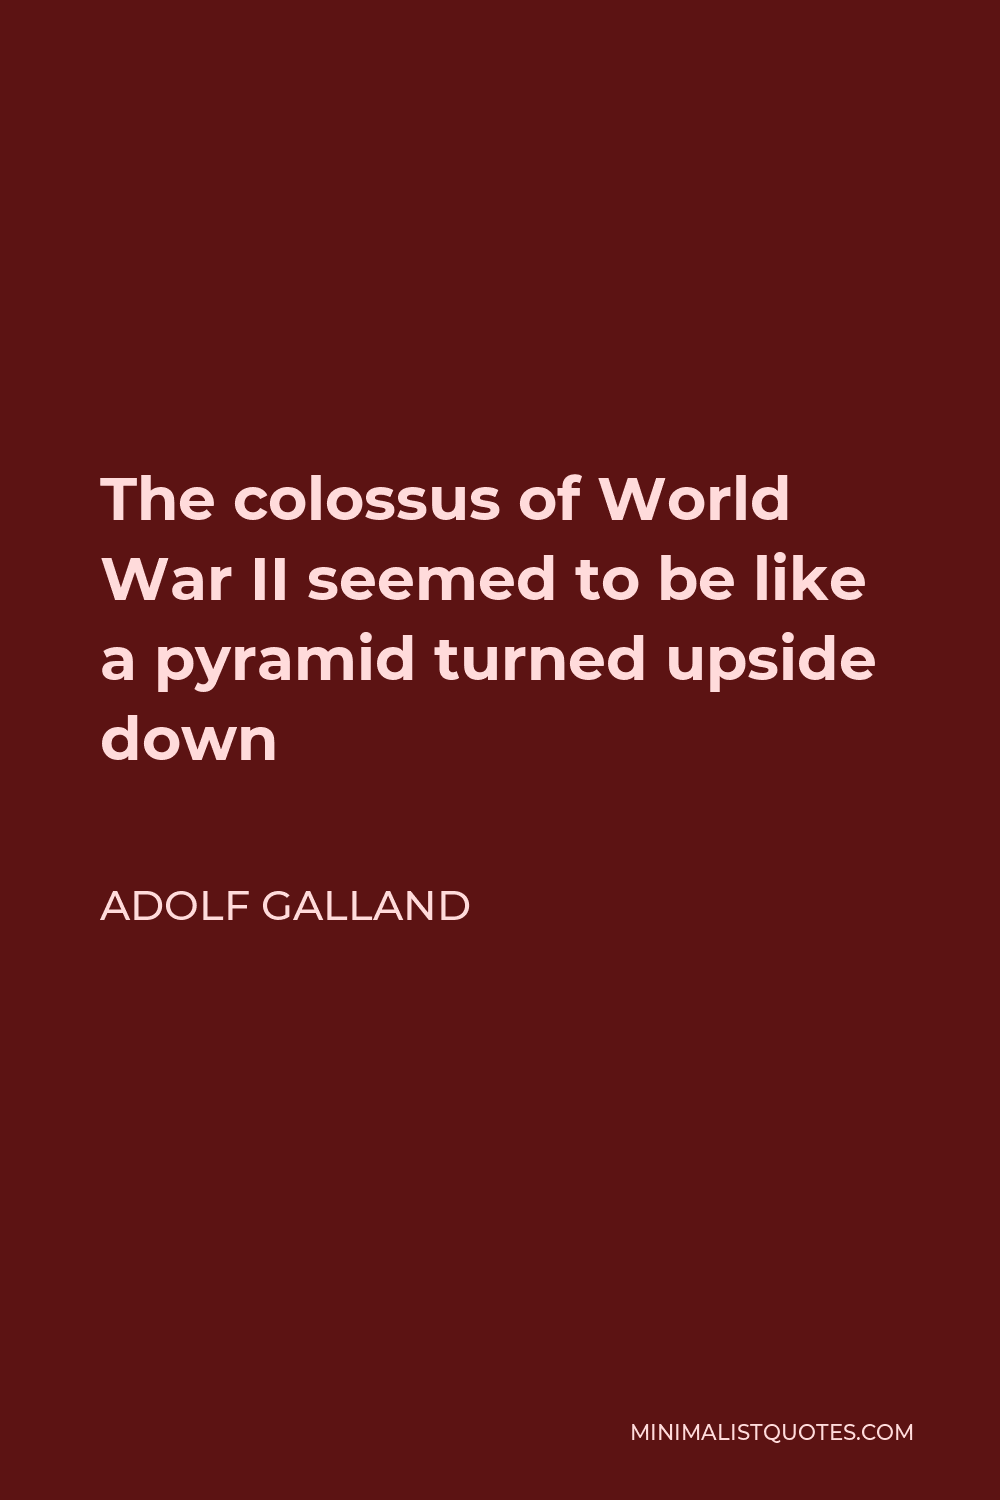 Adolf Galland Quote - The colossus of World War II seemed to be like a pyramid turned upside down